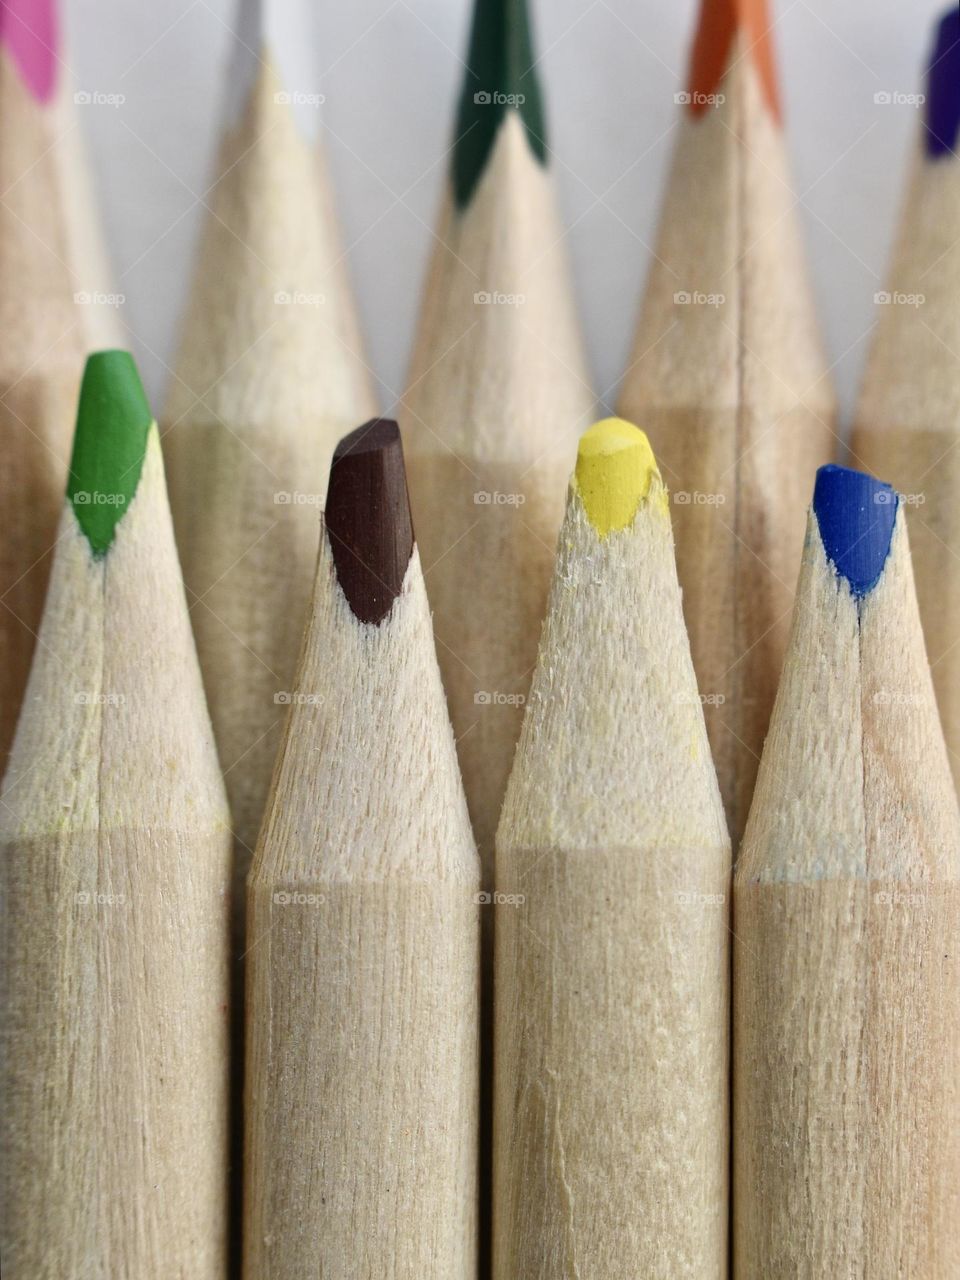 coloring pencils made of wood 